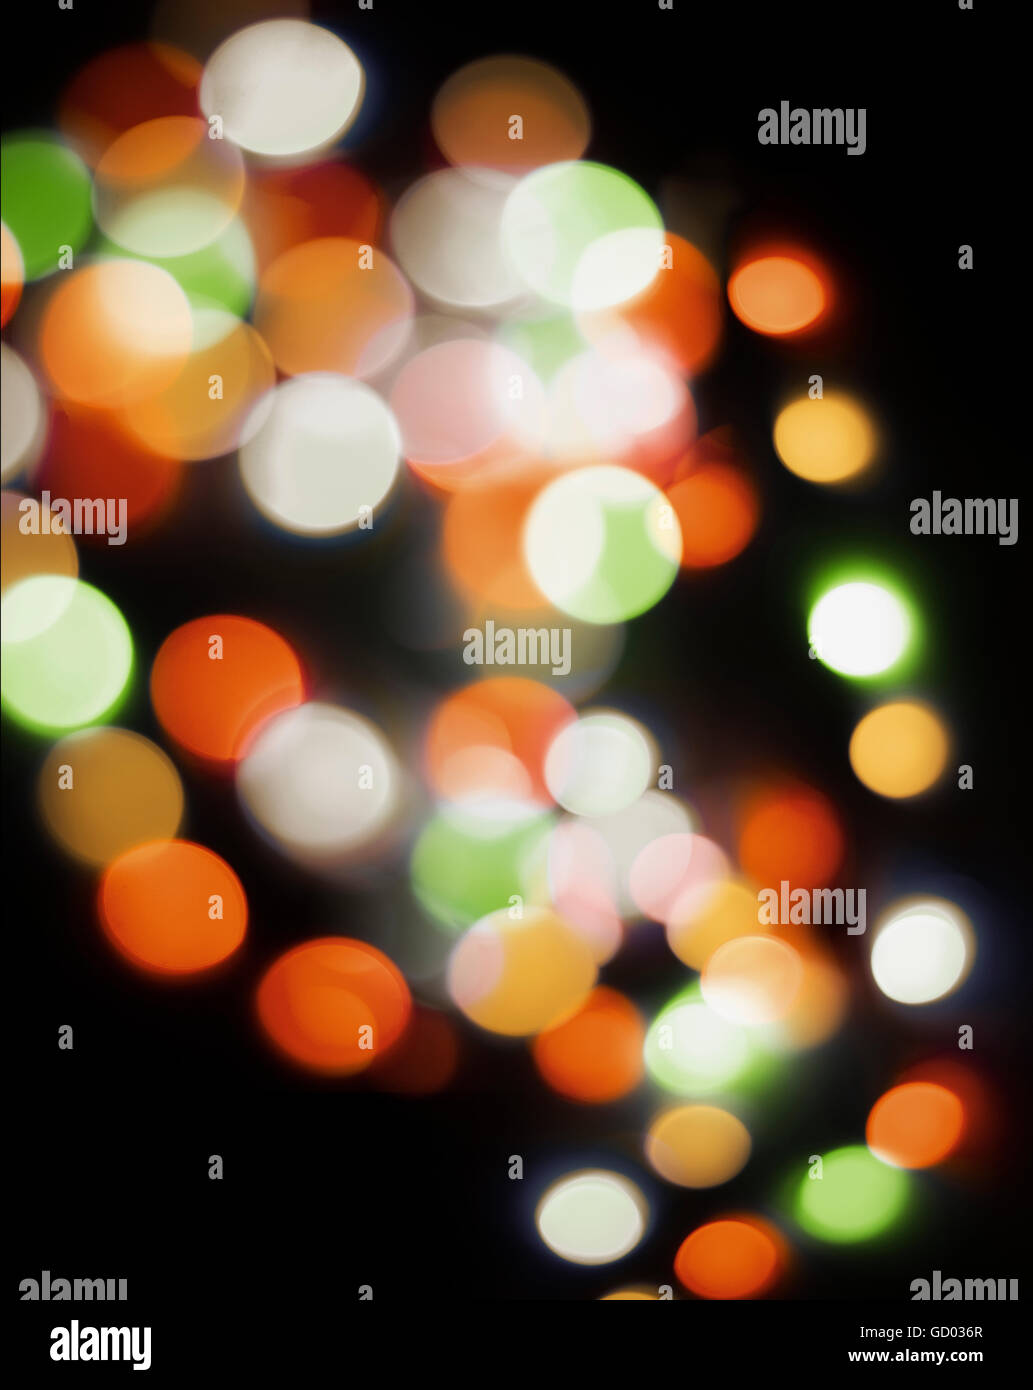 bokeh in orange and green colors Stock Photo